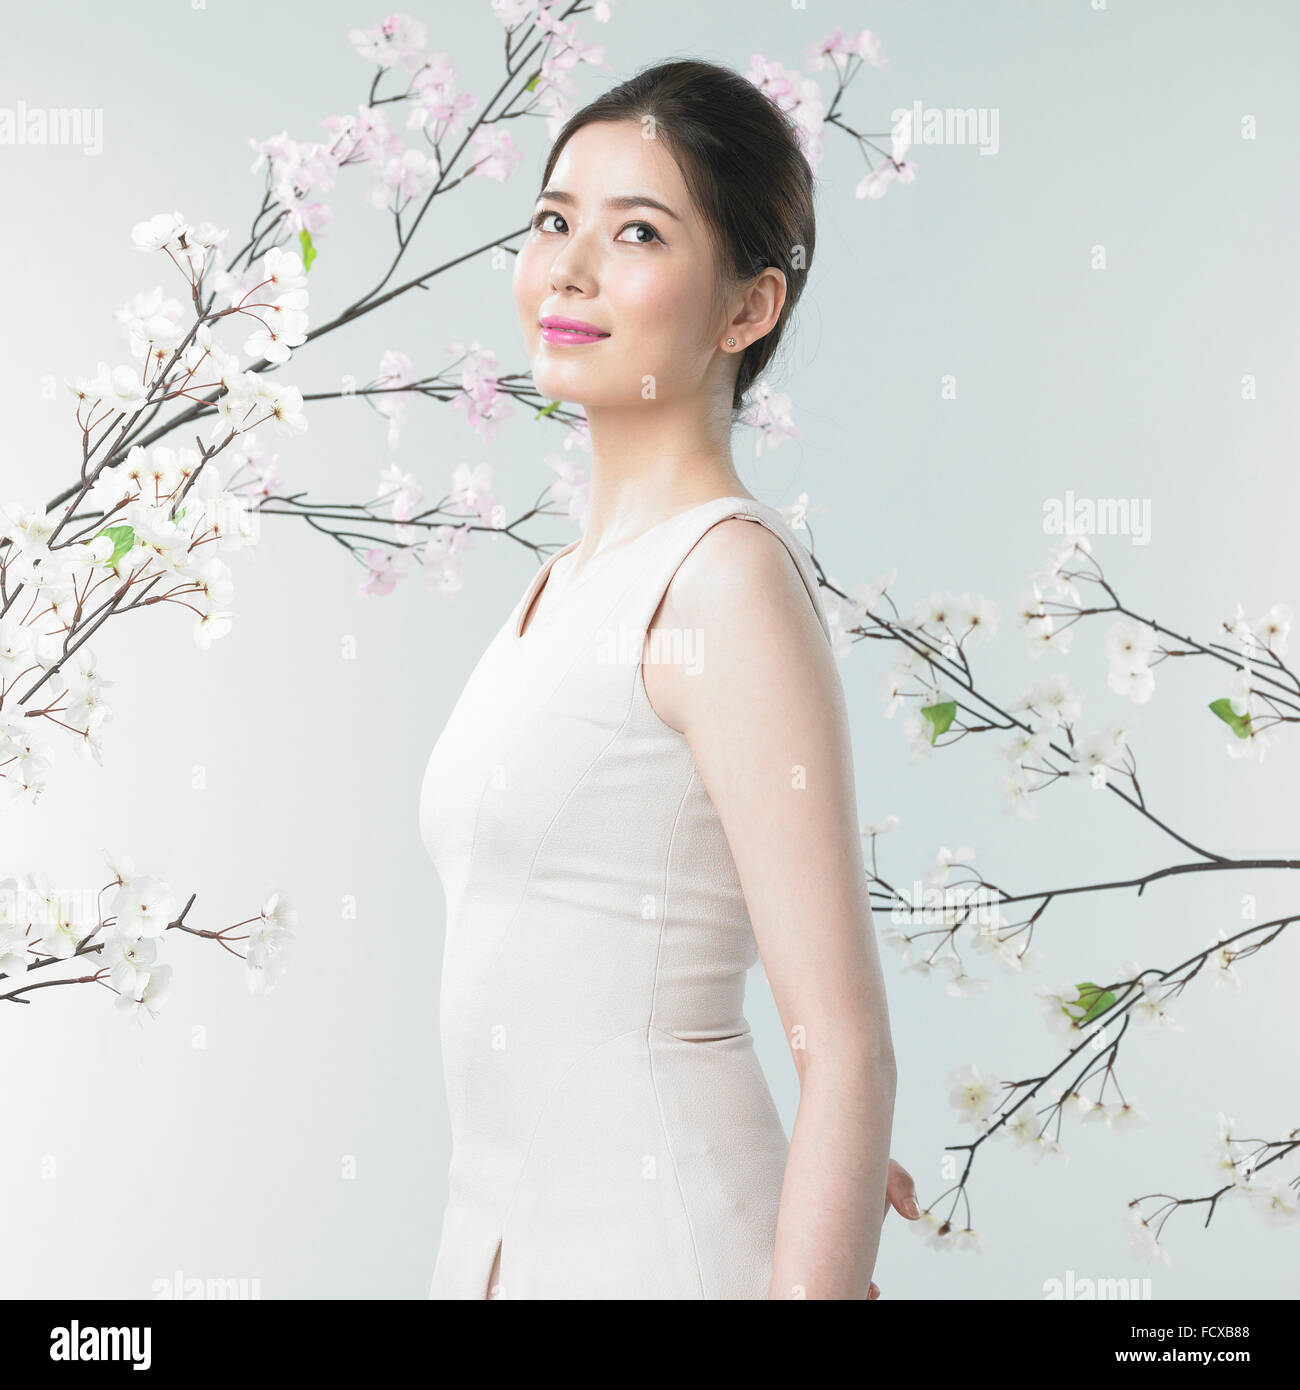 Woman smiling and looking up with the background of cherry blossom branches Stock Photo